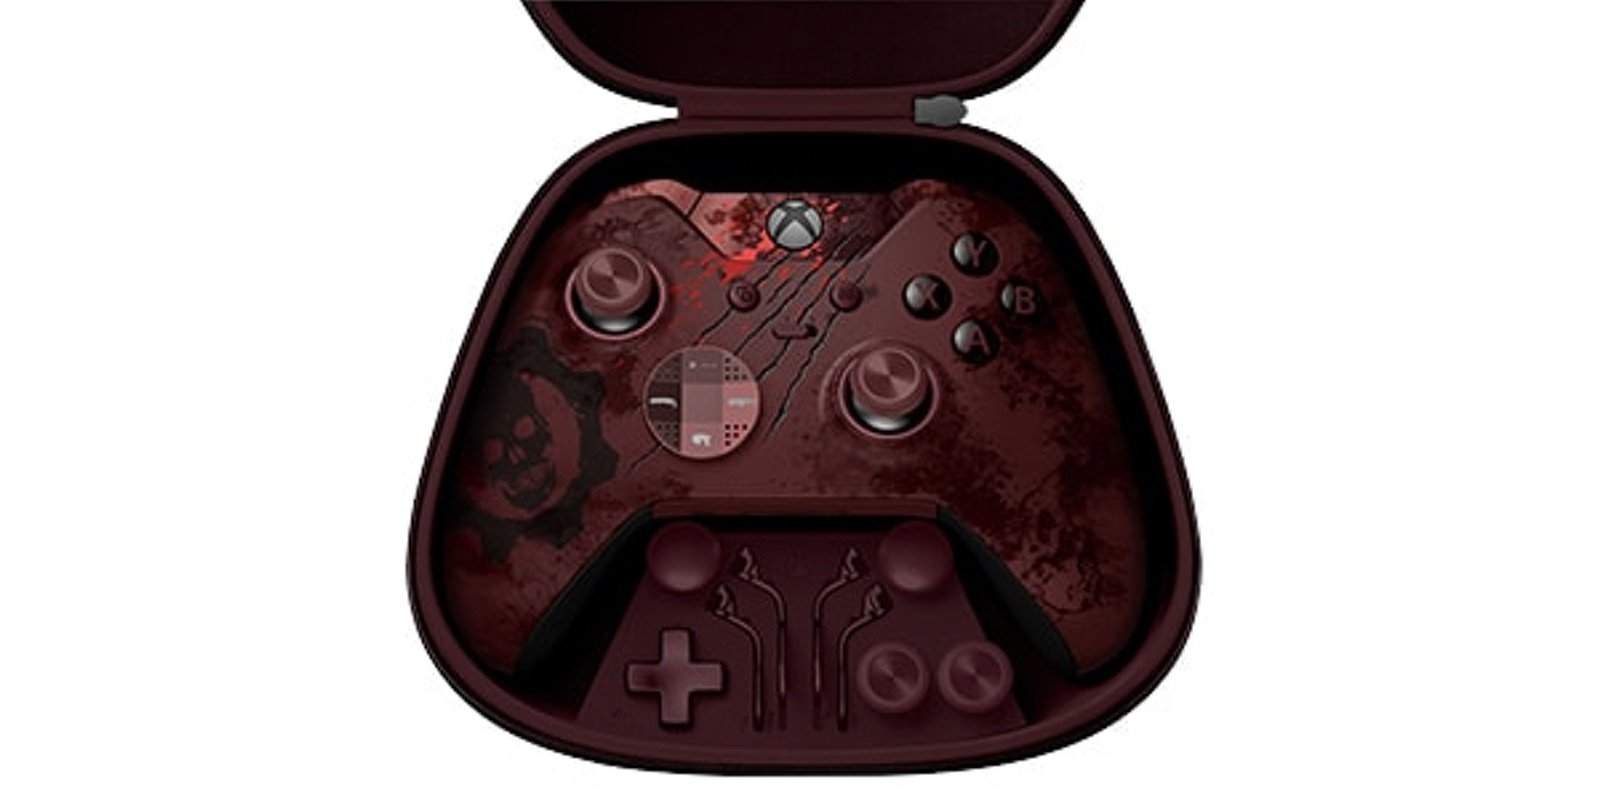 Vamers - FYI - Gaming - Microsoft is Releasing a Gears of War 4 Xbox Elite Controller - 03